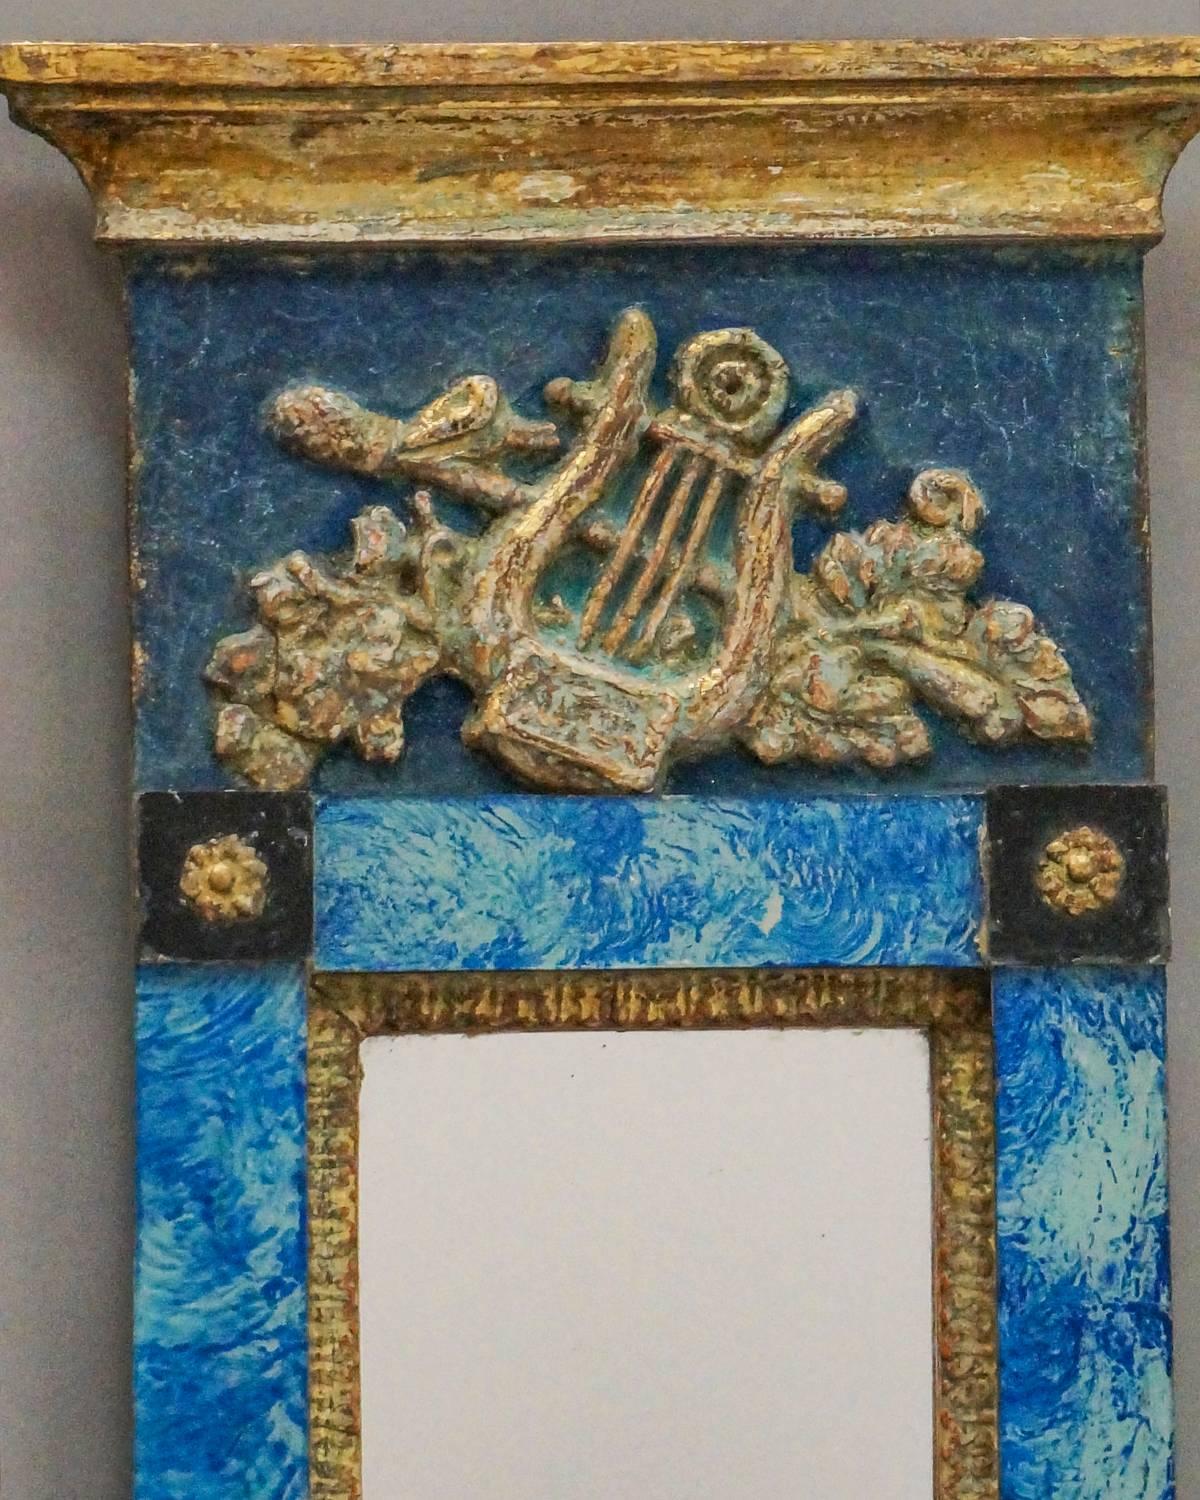 Small Swedish mirror, circa 1820, with applied classical detail on a brilliant blue ground. Reverse painted glass surrounding the mirror adds sparkle.